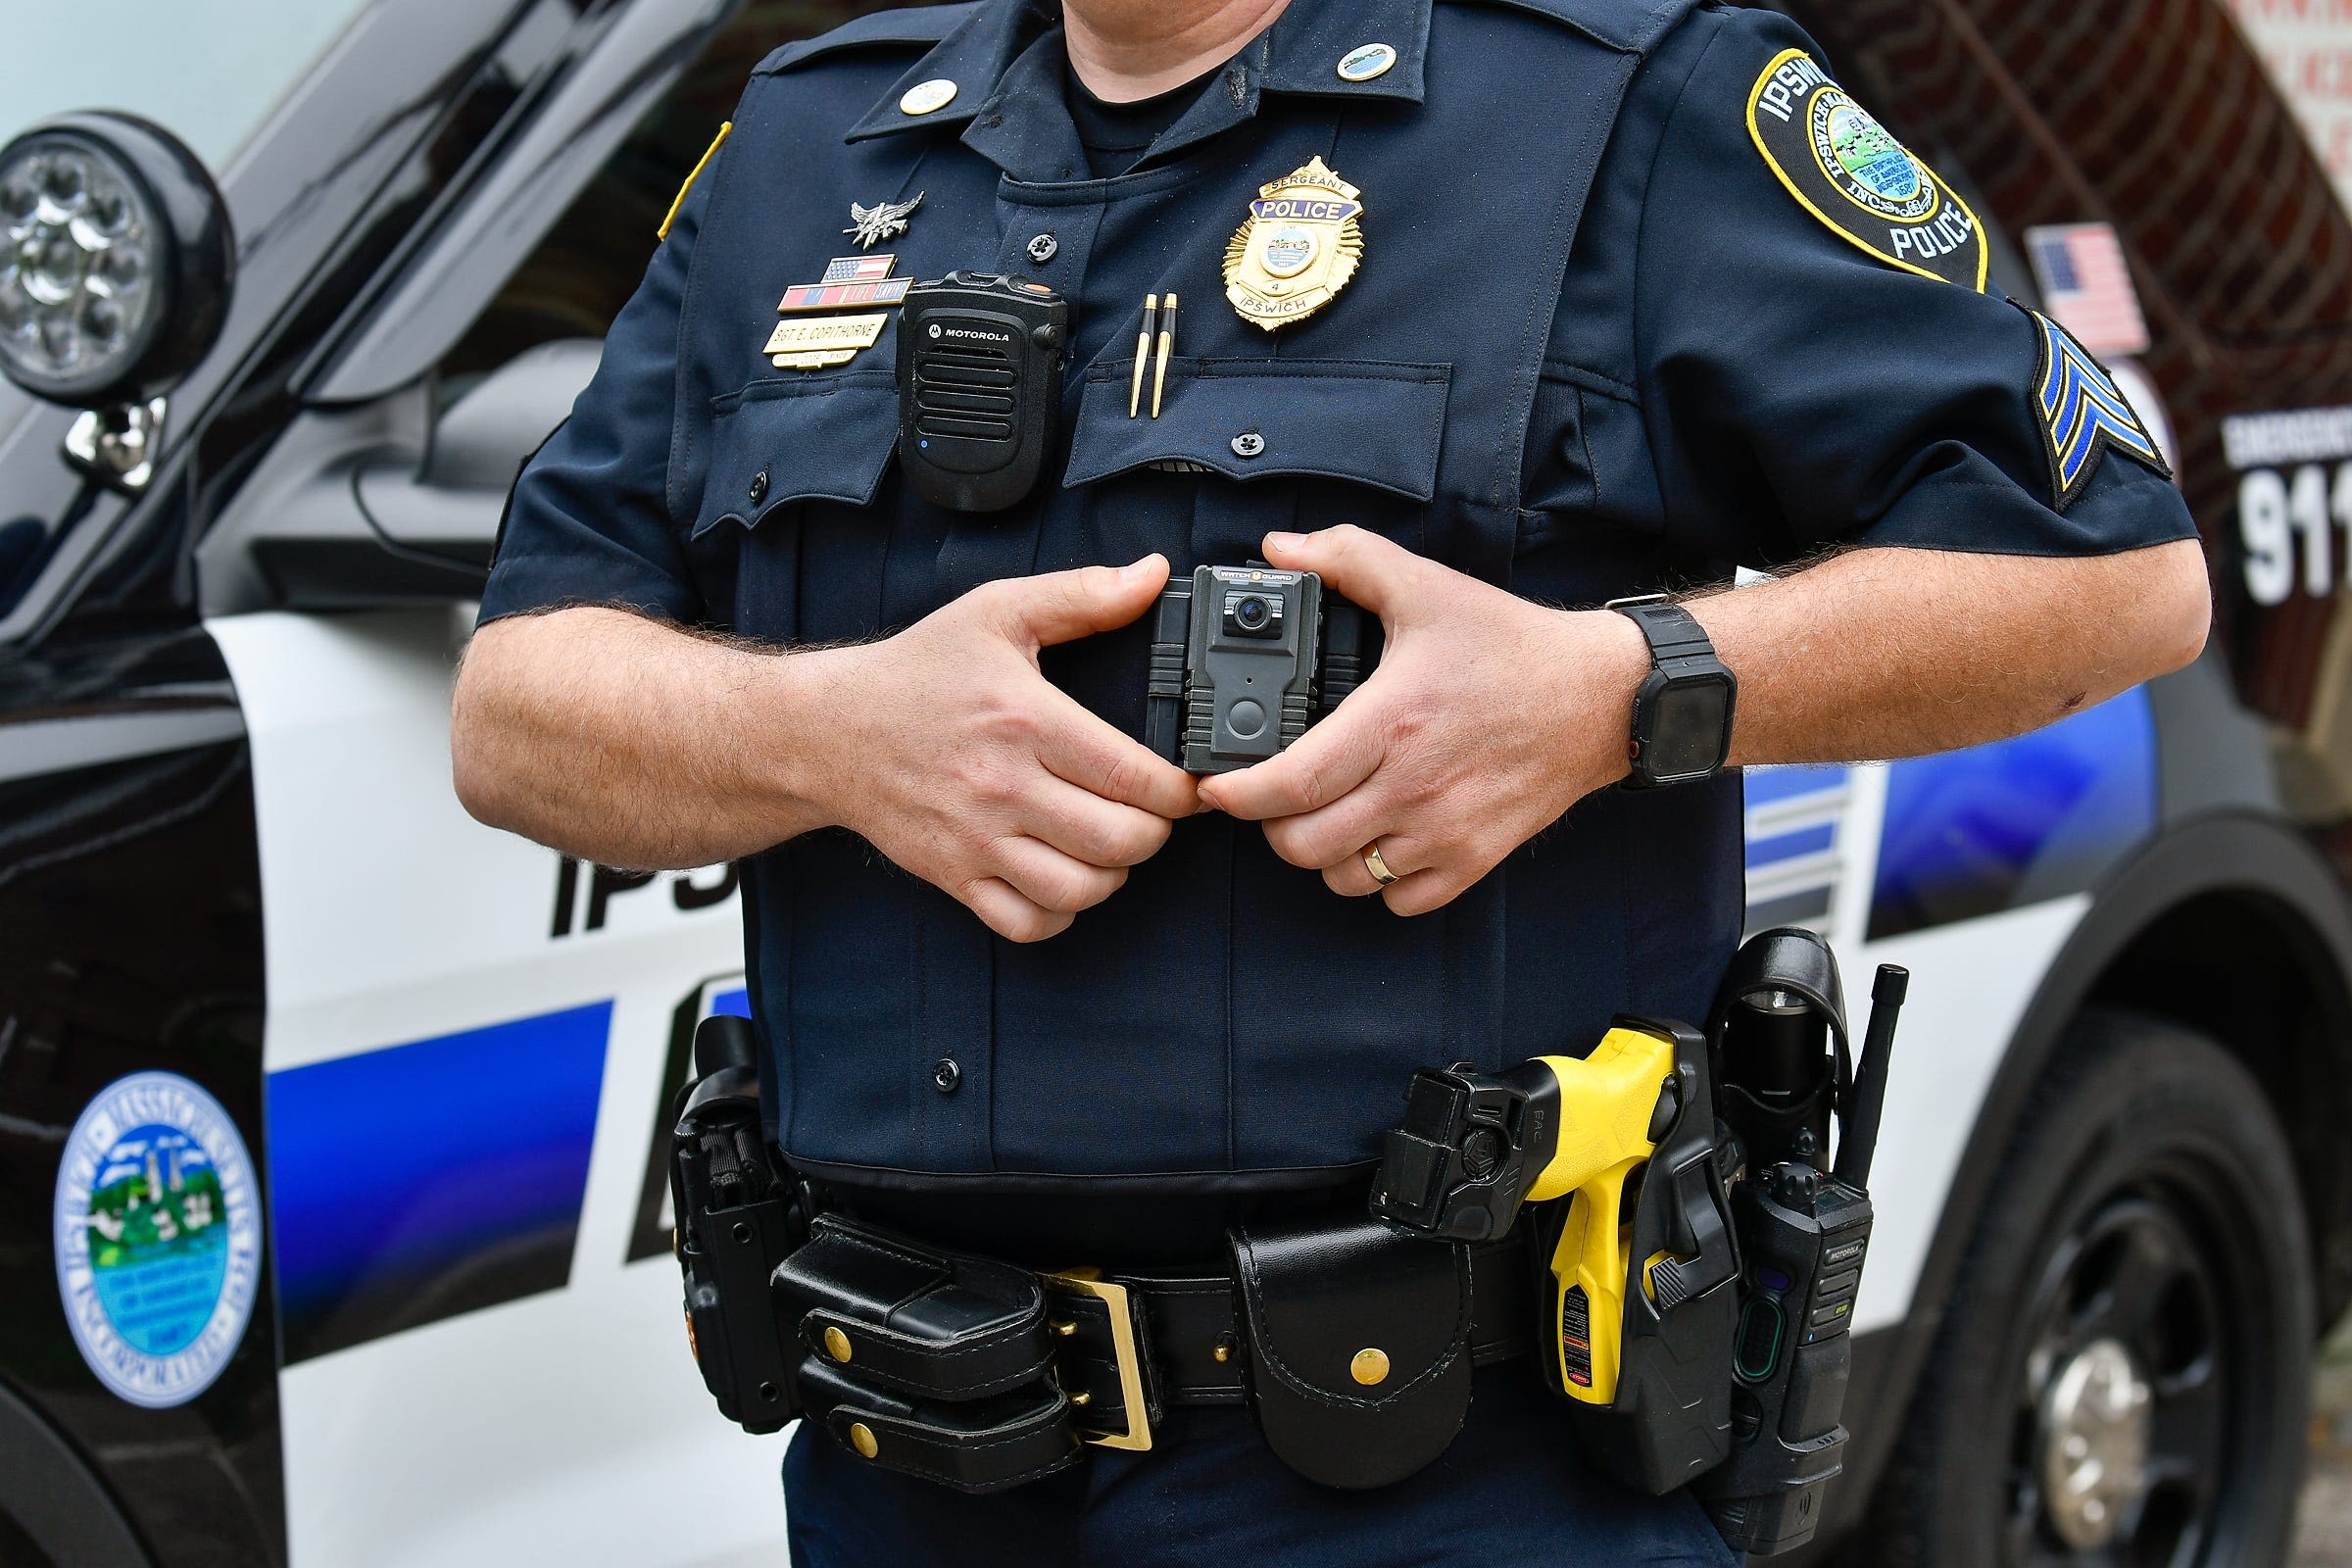 Massachusetts gave $3 million in grants to outfit police with body cams. Here's where.